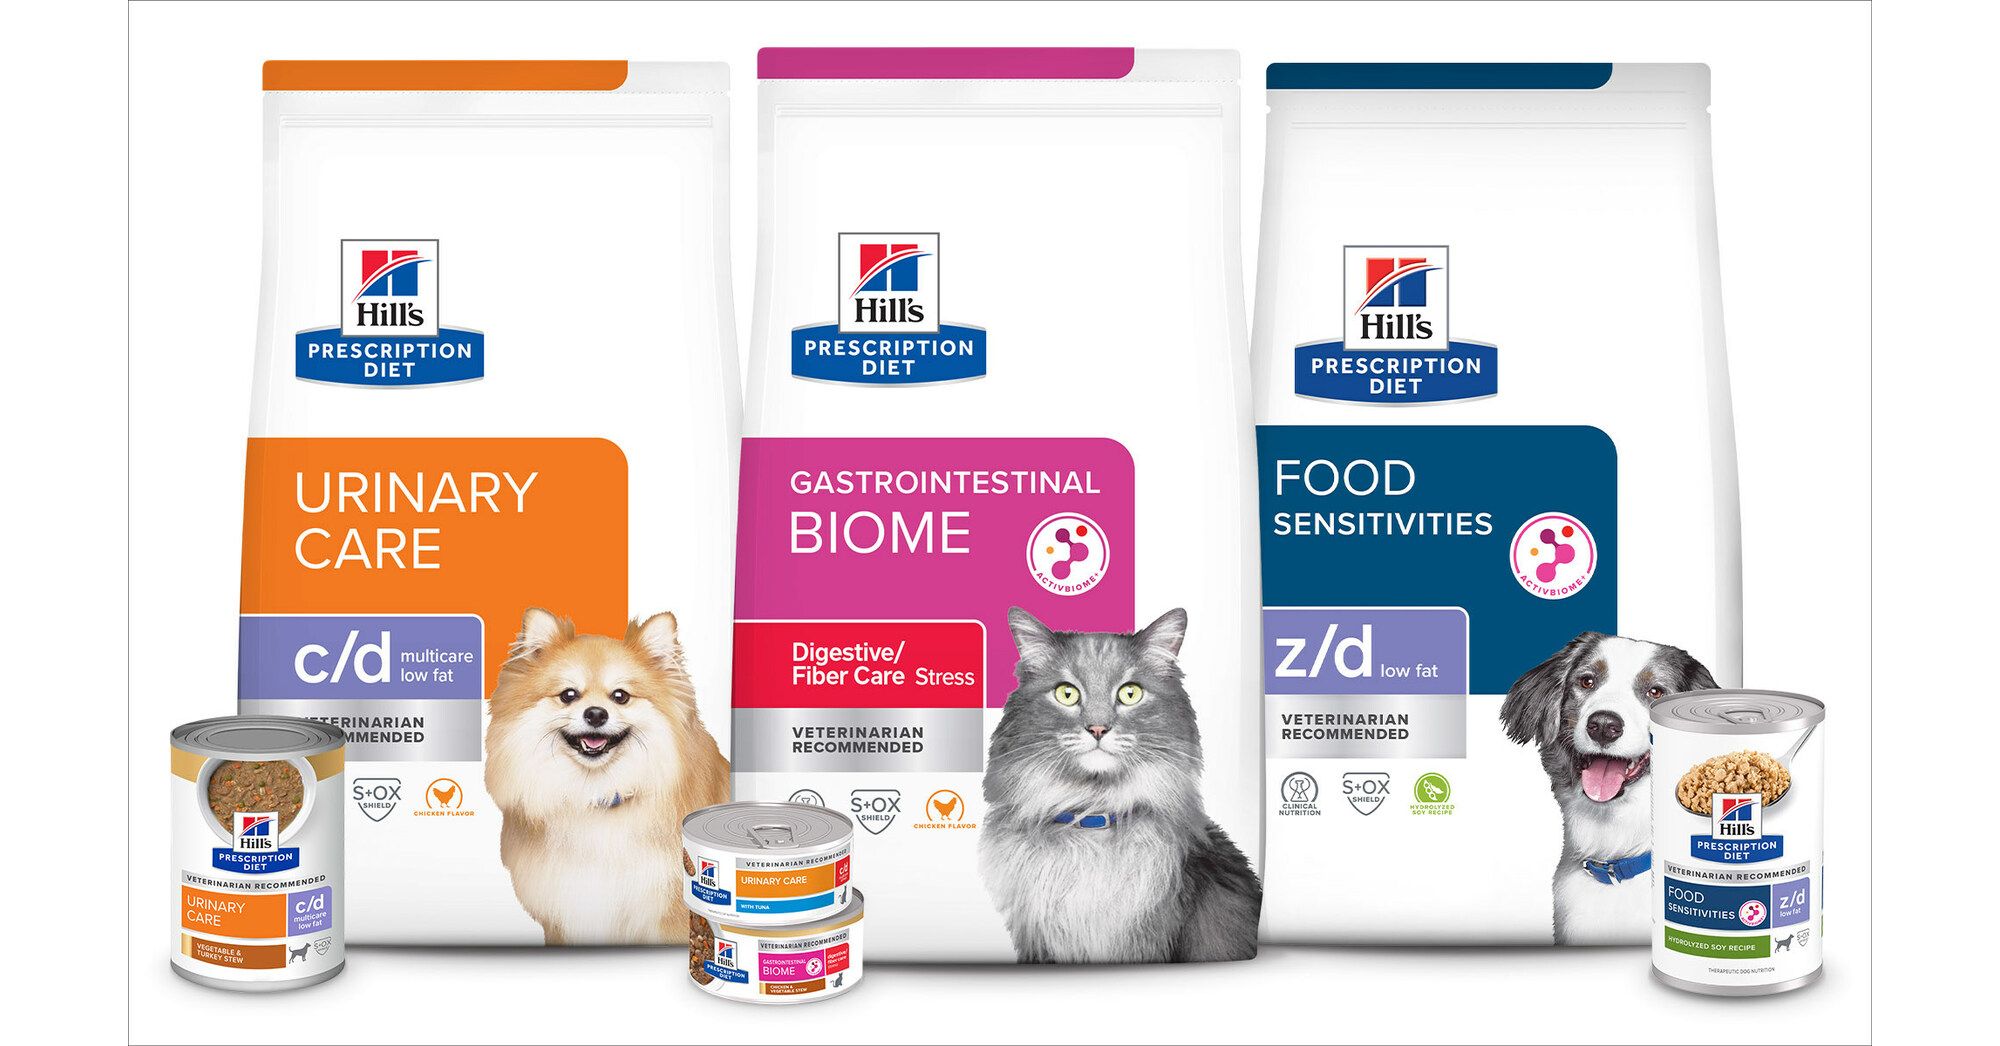 HILL’S PET NUTRITION TO UNVEIL PRESCRIPTION DIET INNOVATIONS; HIGHLIGHT WEIGHT MANAGEMENT RESOURCES DURING VMX 2024